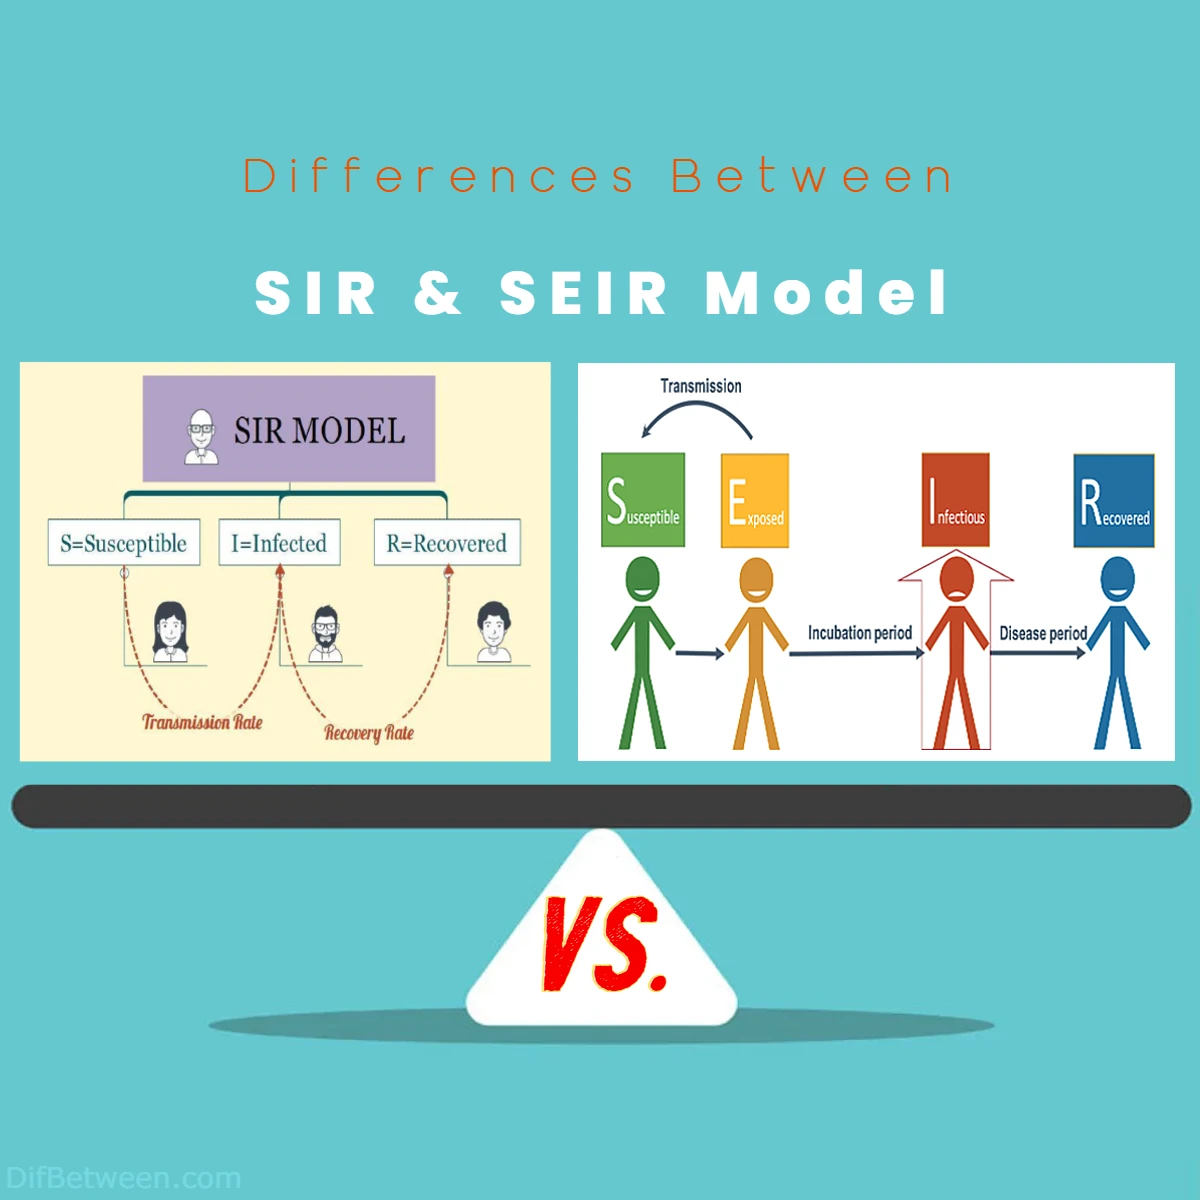 Differences Between SIR vs SEIR Model